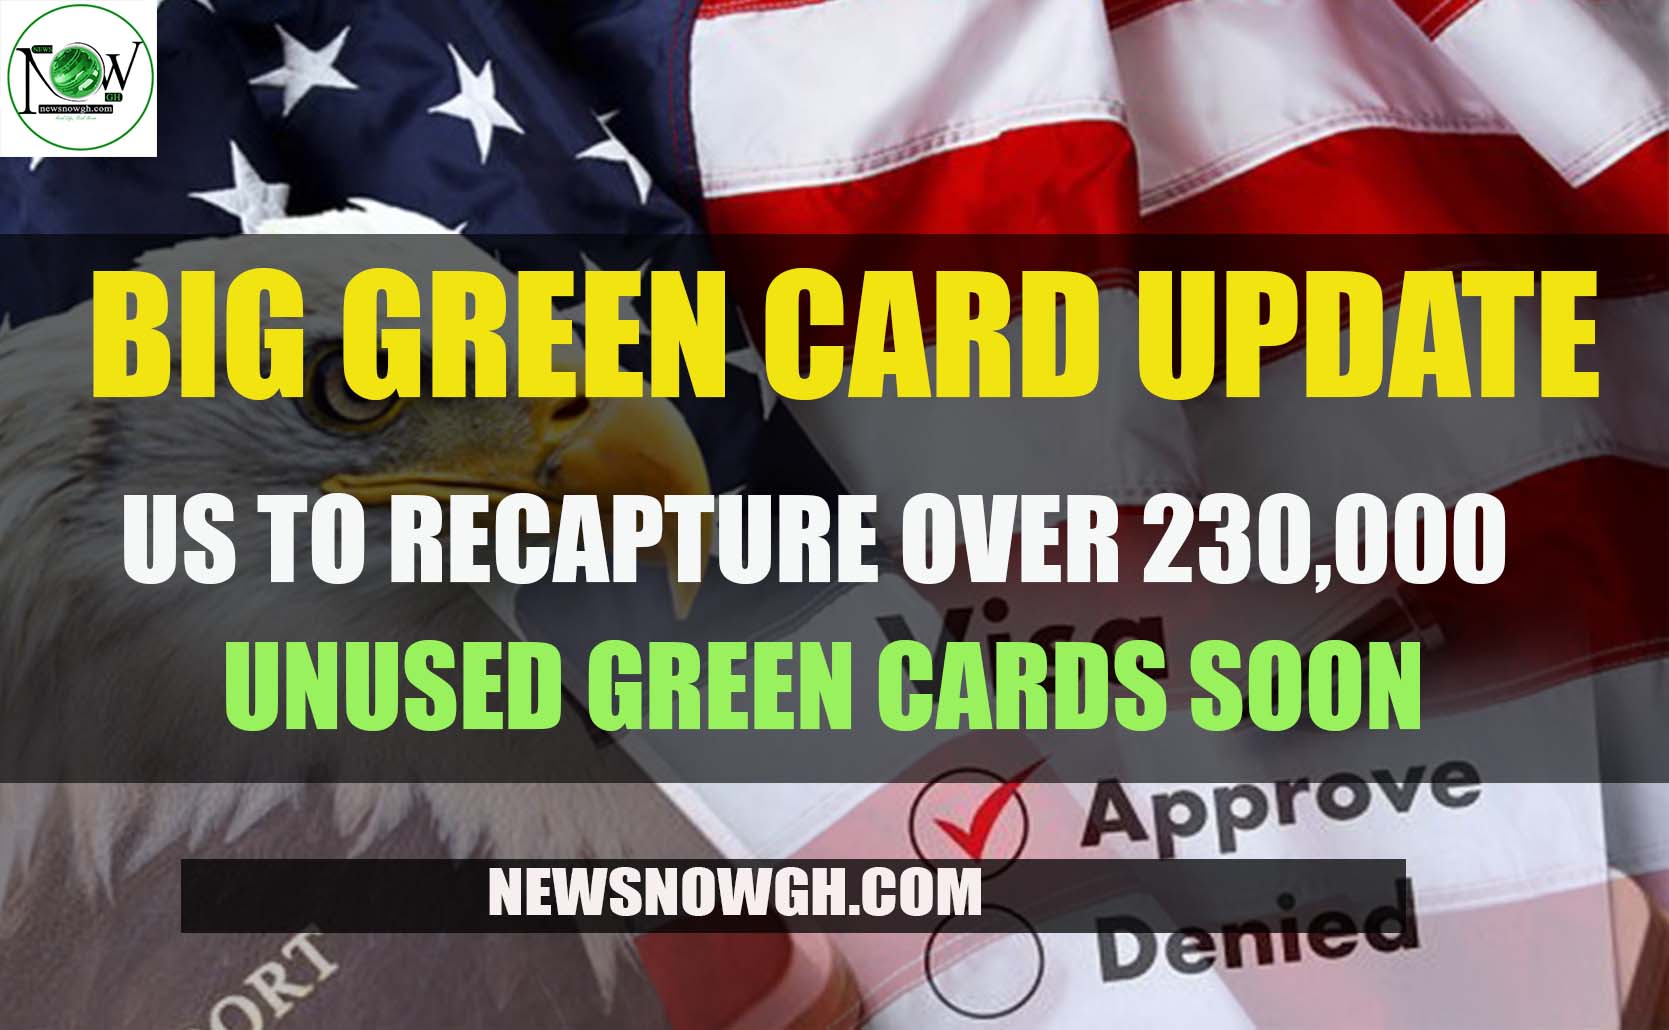 US to Recapture Over 230,000 Unused Green Cards